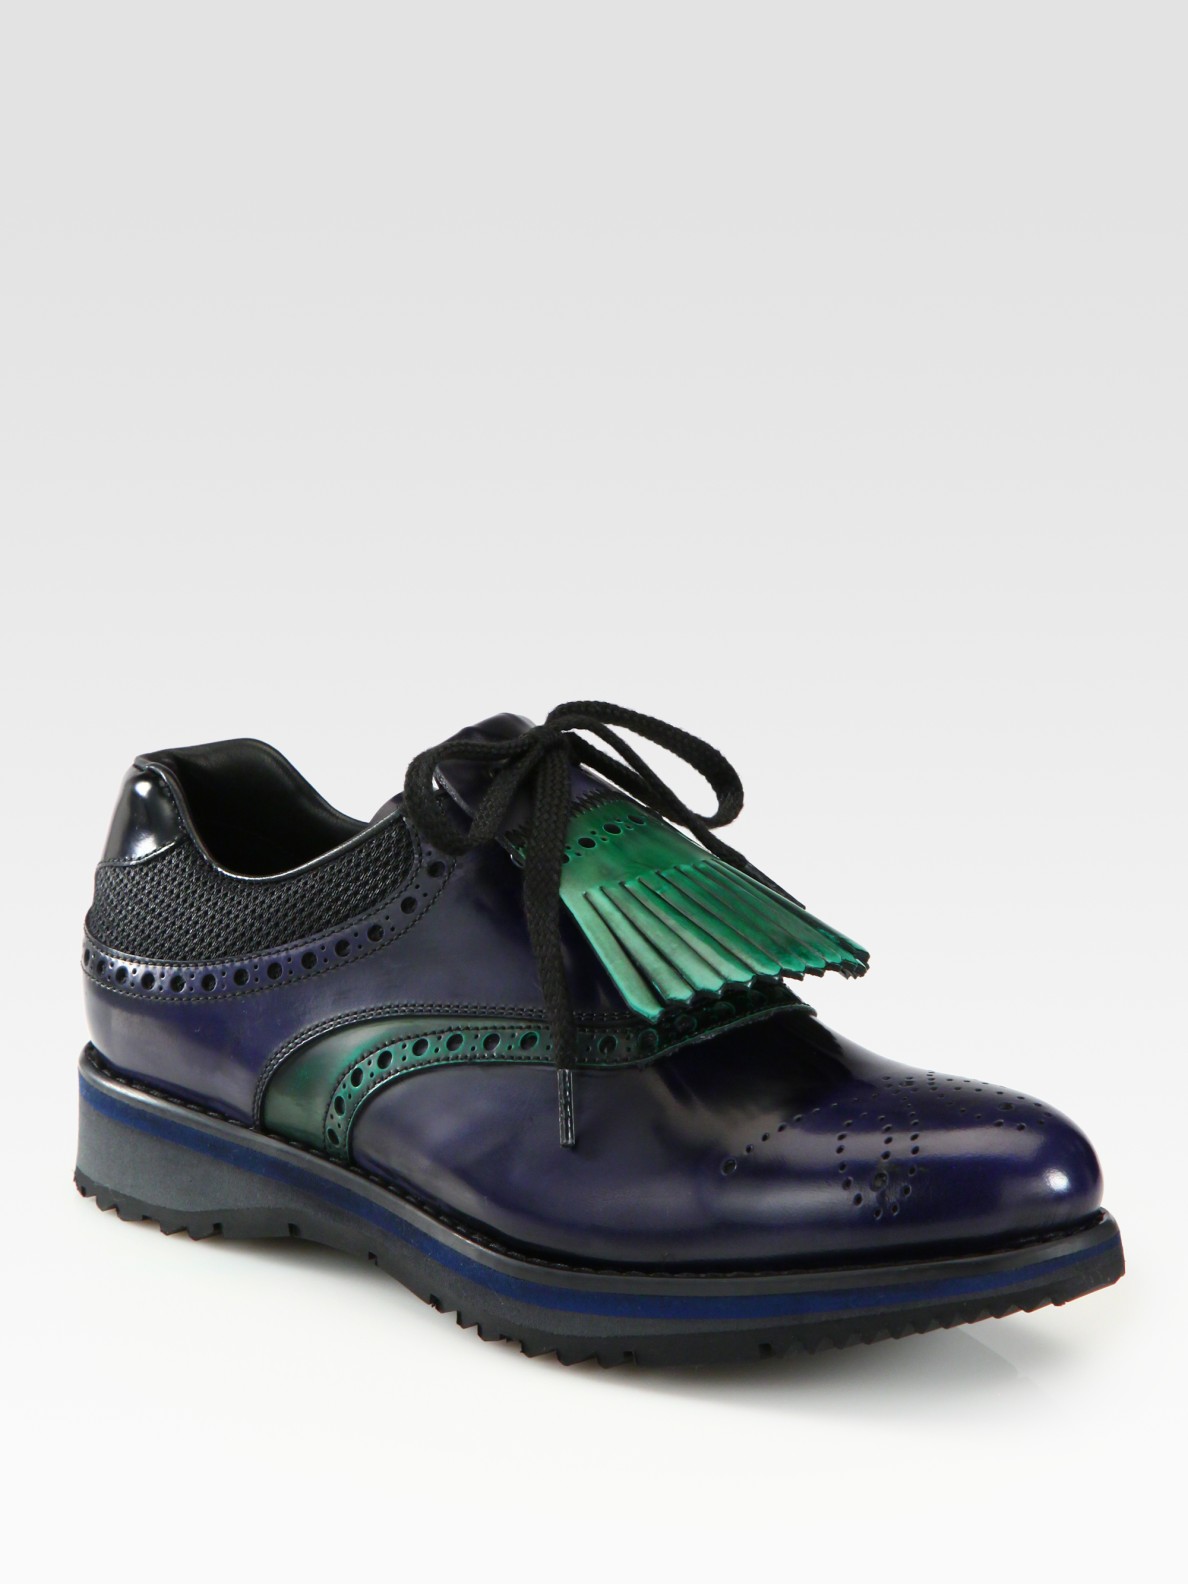 Prada Leather Wingtip Golf Shoes in 